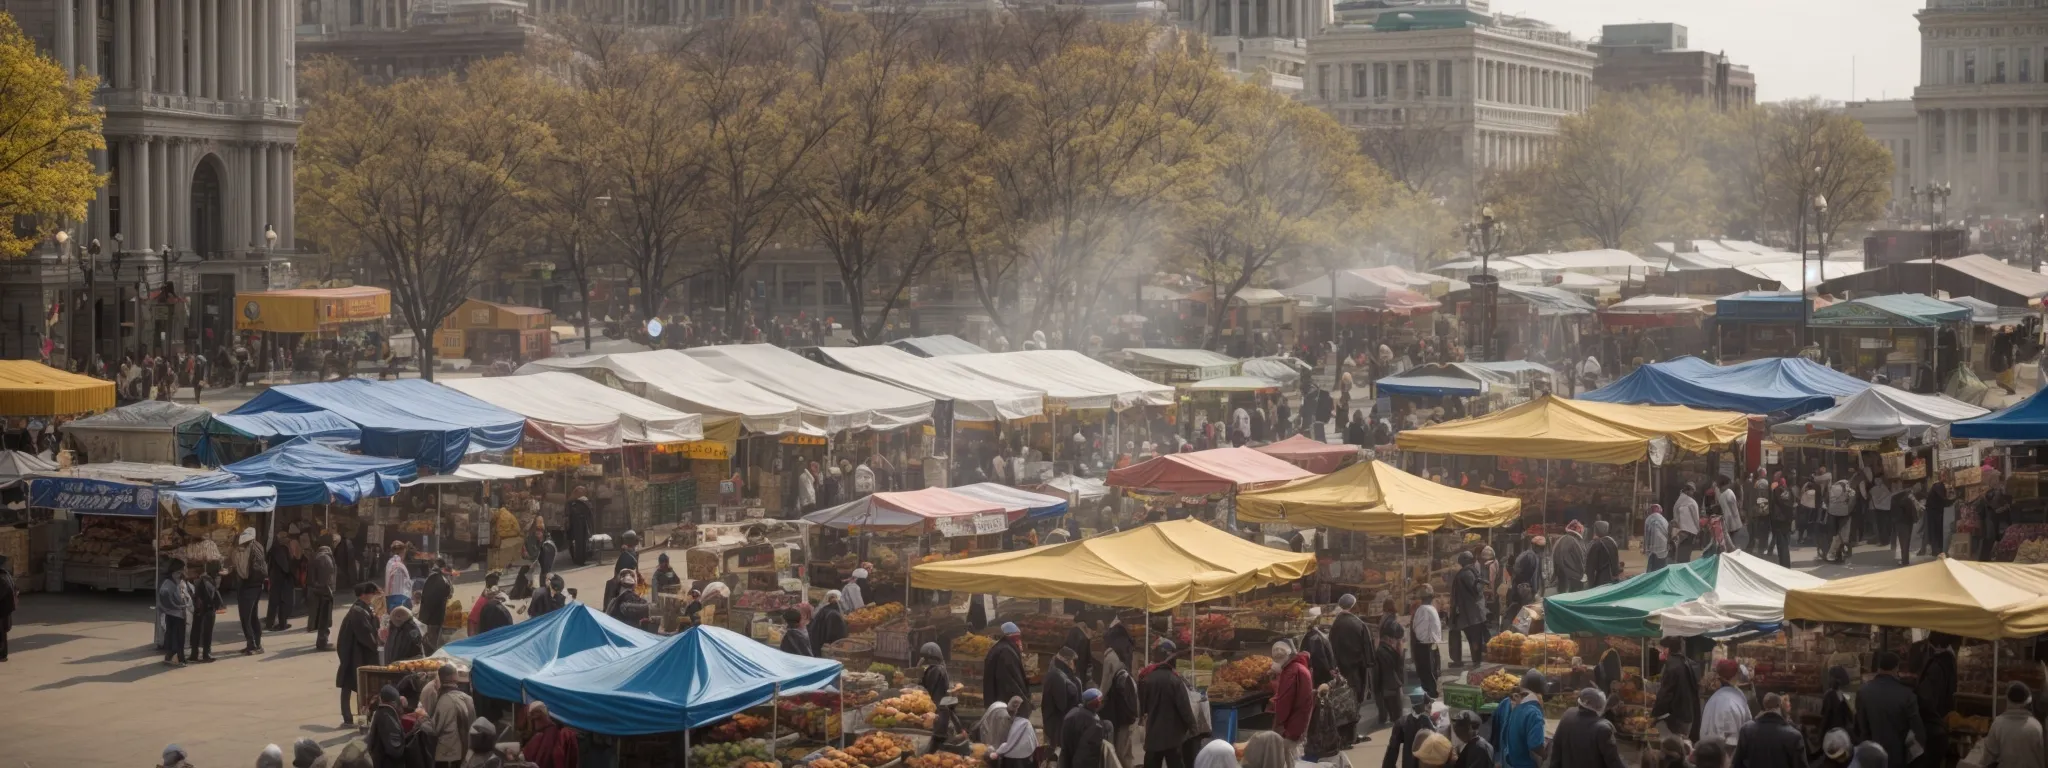 a lively local market buzzes with activity against the backdrop of the iconic pennsylvania state capitol in harrisburg.